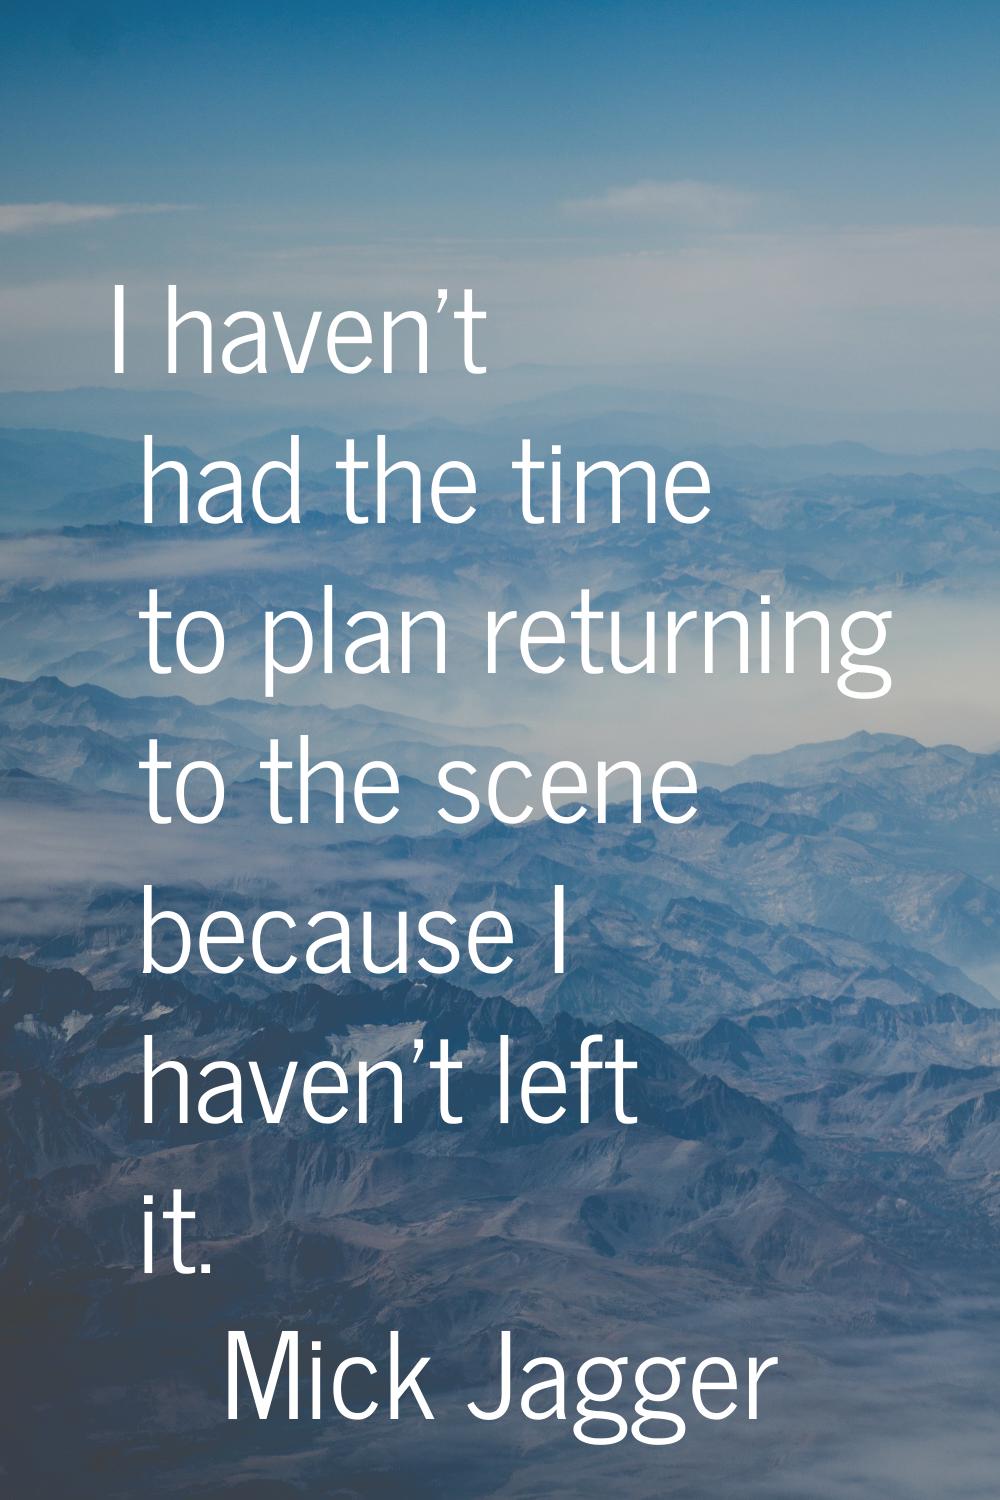 I haven't had the time to plan returning to the scene because I haven't left it.